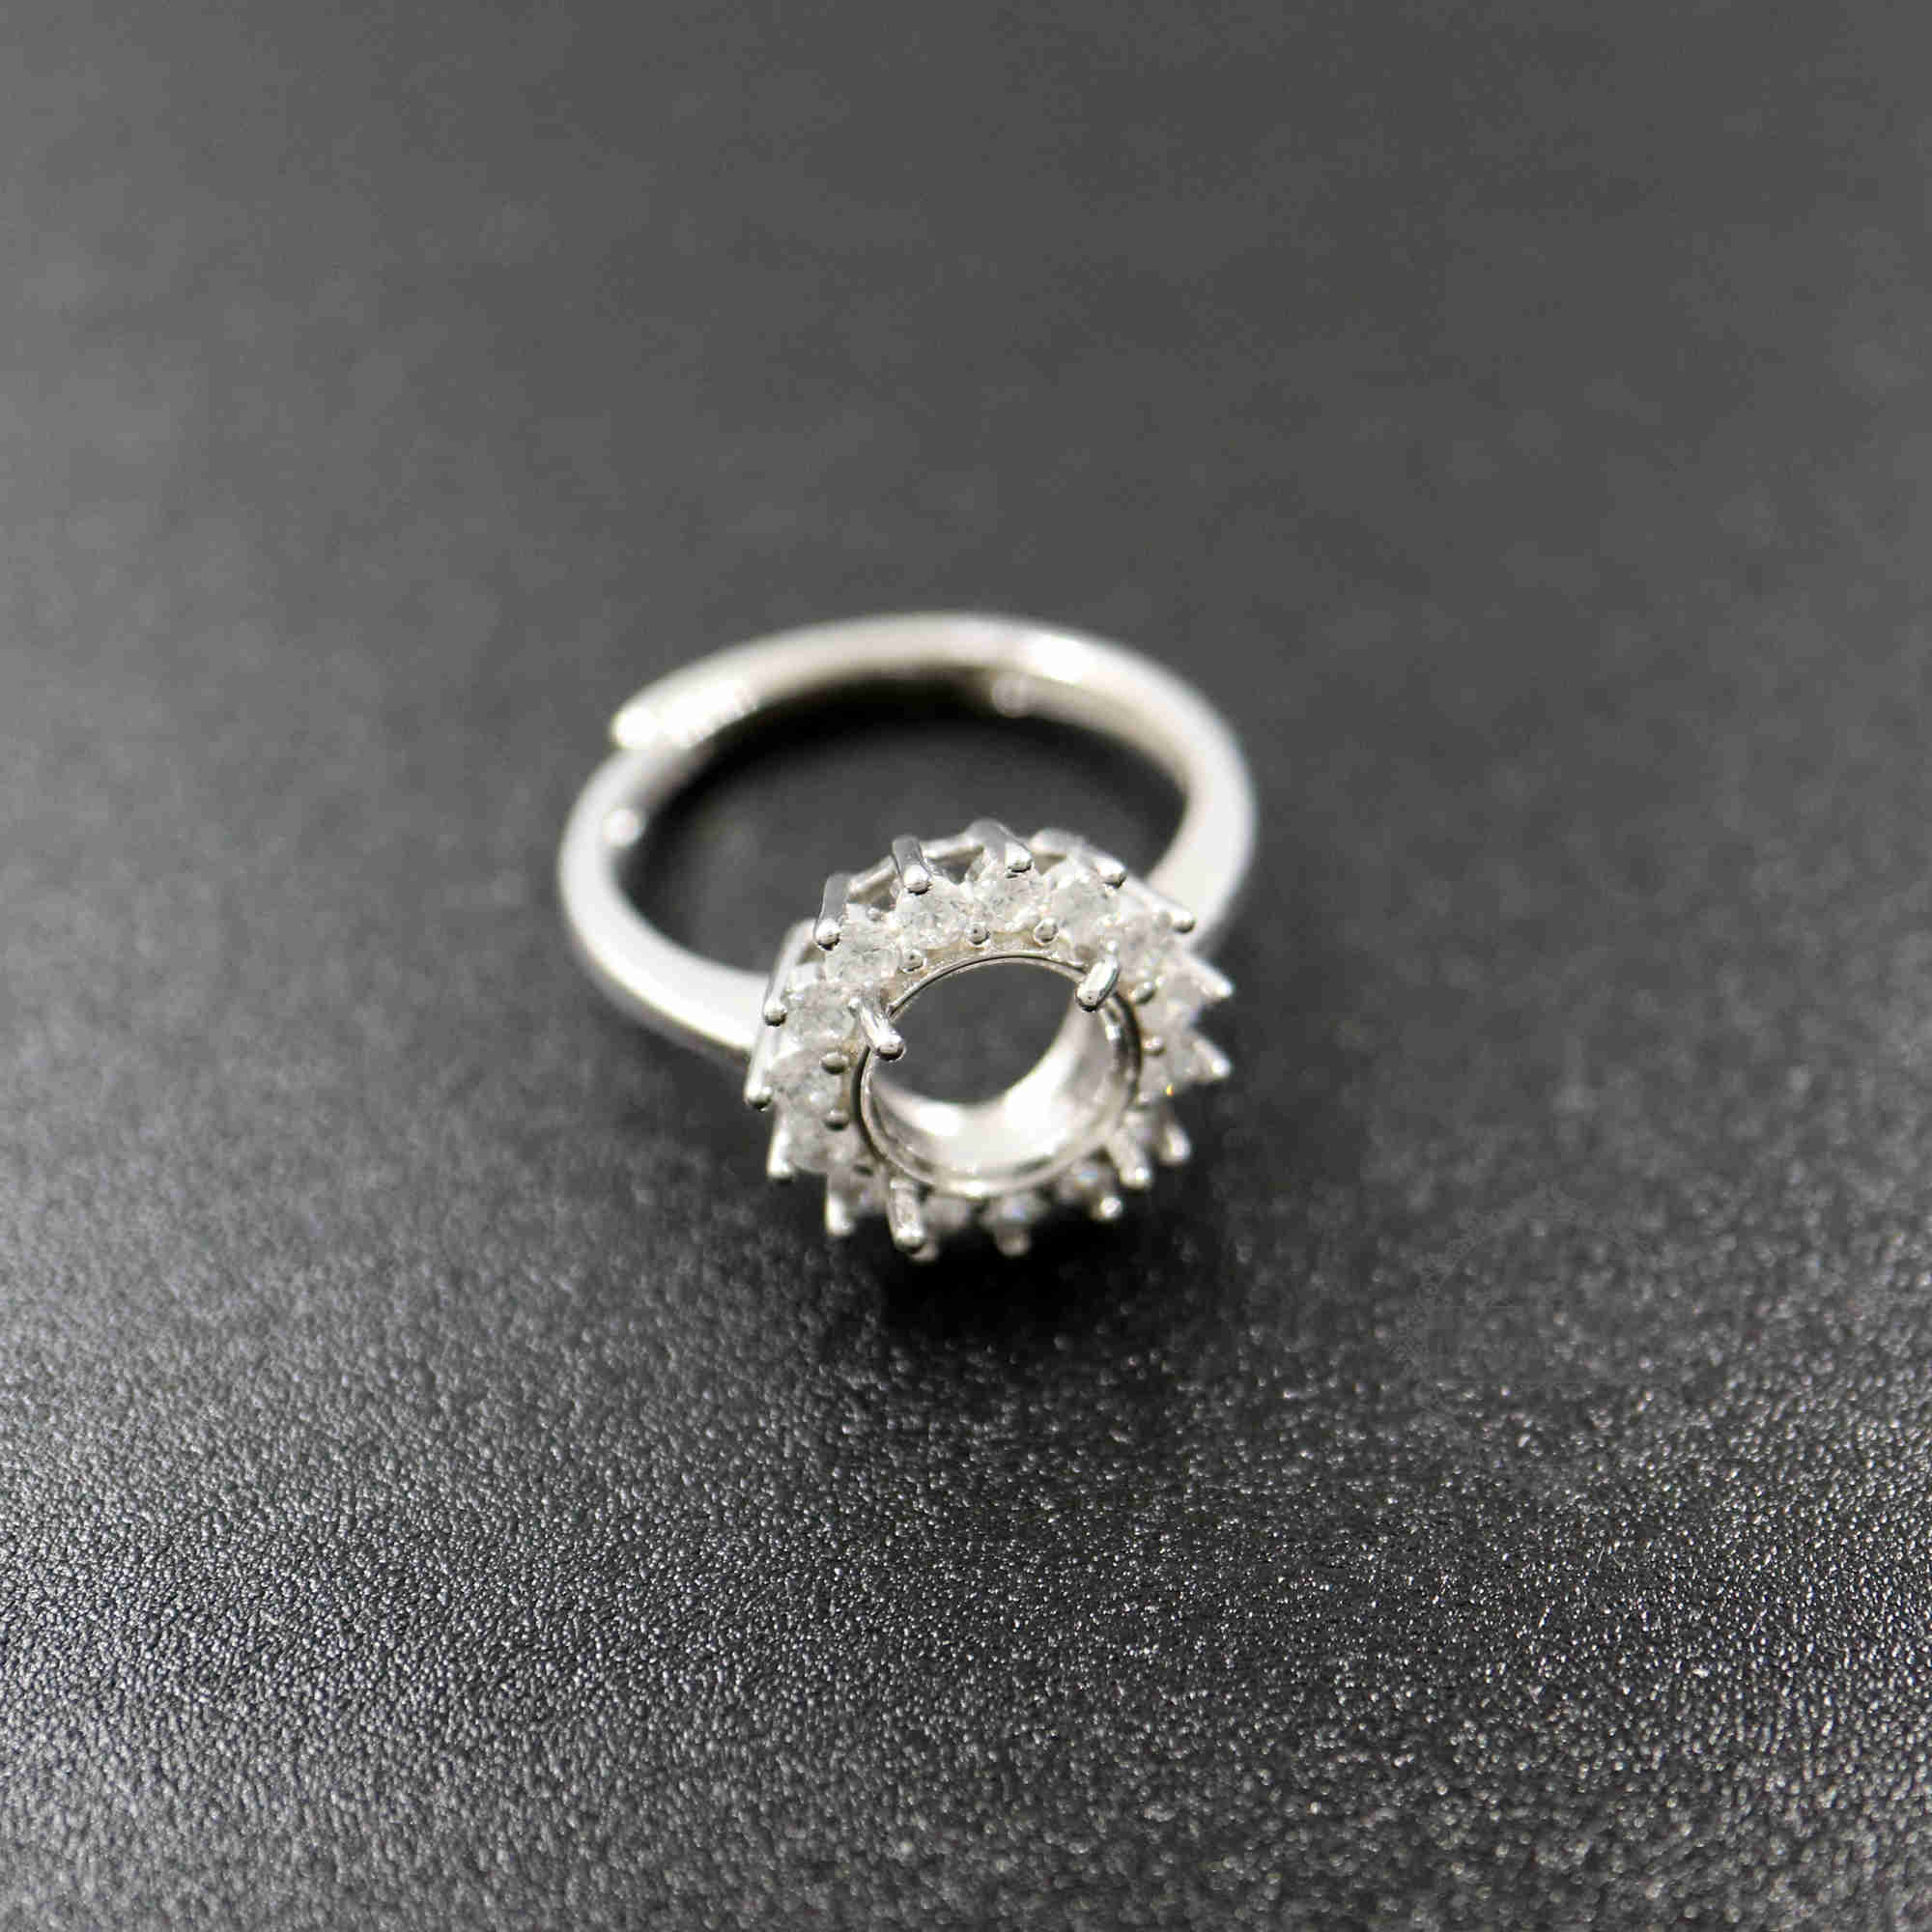 1Pcs 8-10-12MM Round Cz Stone Prong Setting 925 Sterling Silver Bezel Tray Adjustable Ring Settings 1212036 - Click Image to Close